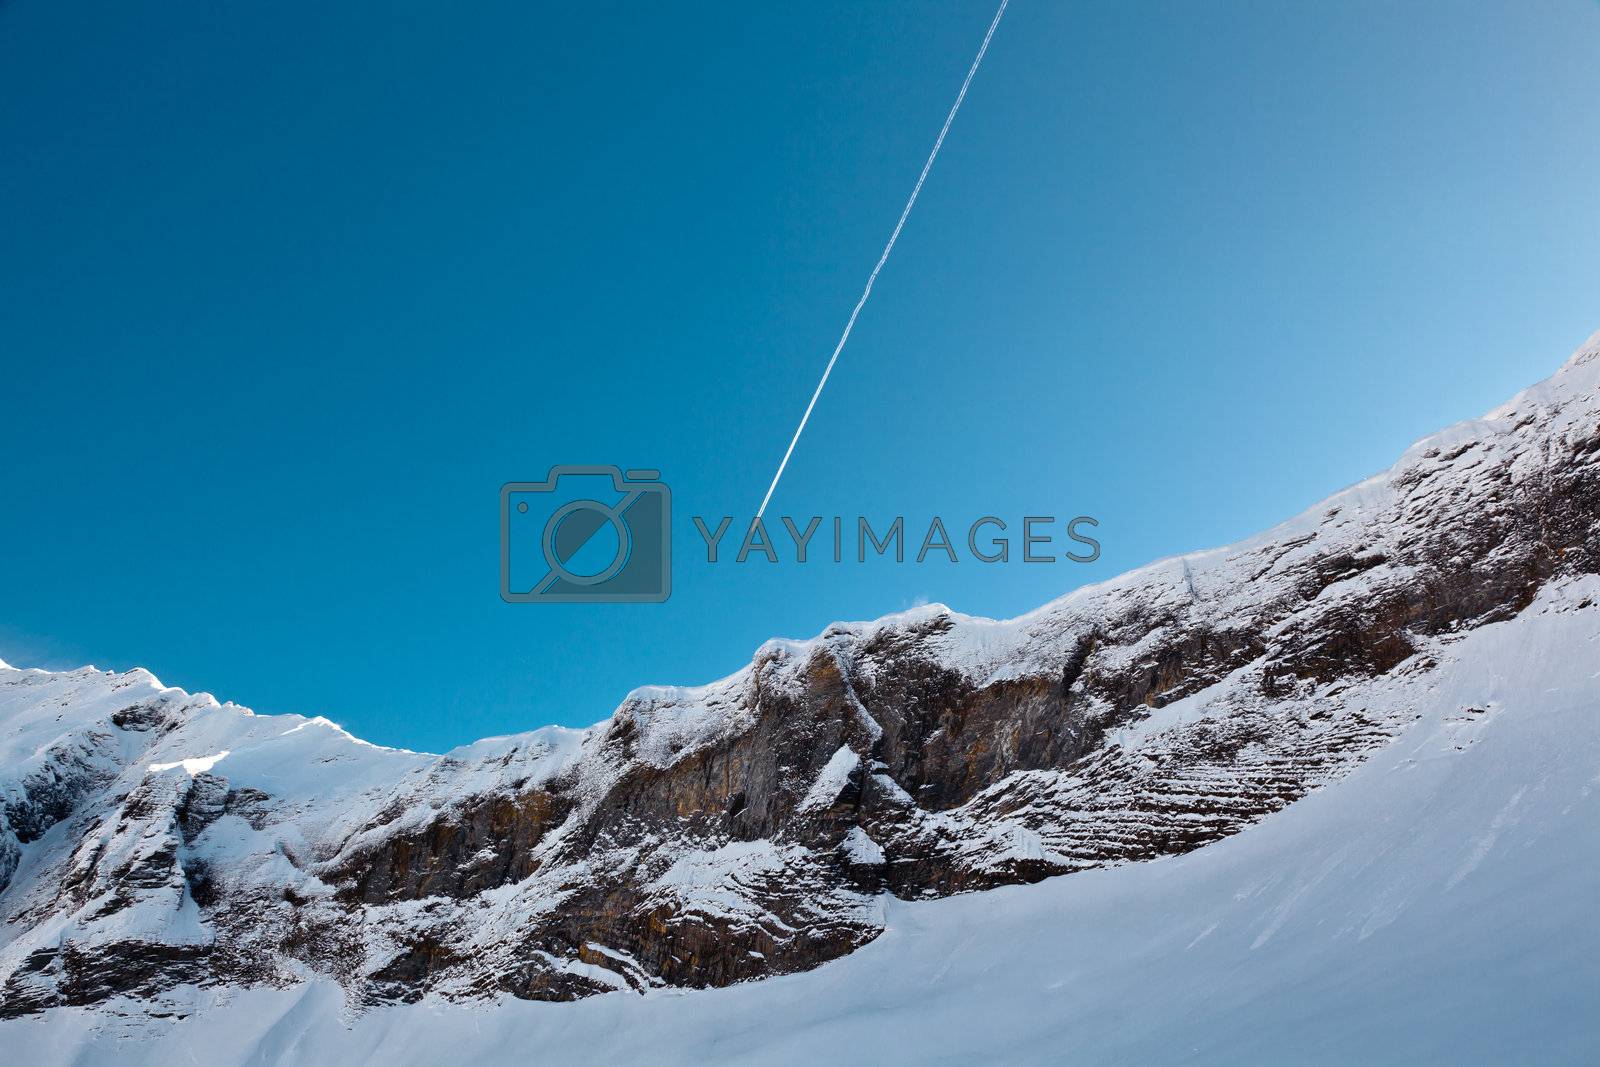 Royalty free image of Airplane Trail in Blue Sky above Mountain Peak, French Alps by anshar